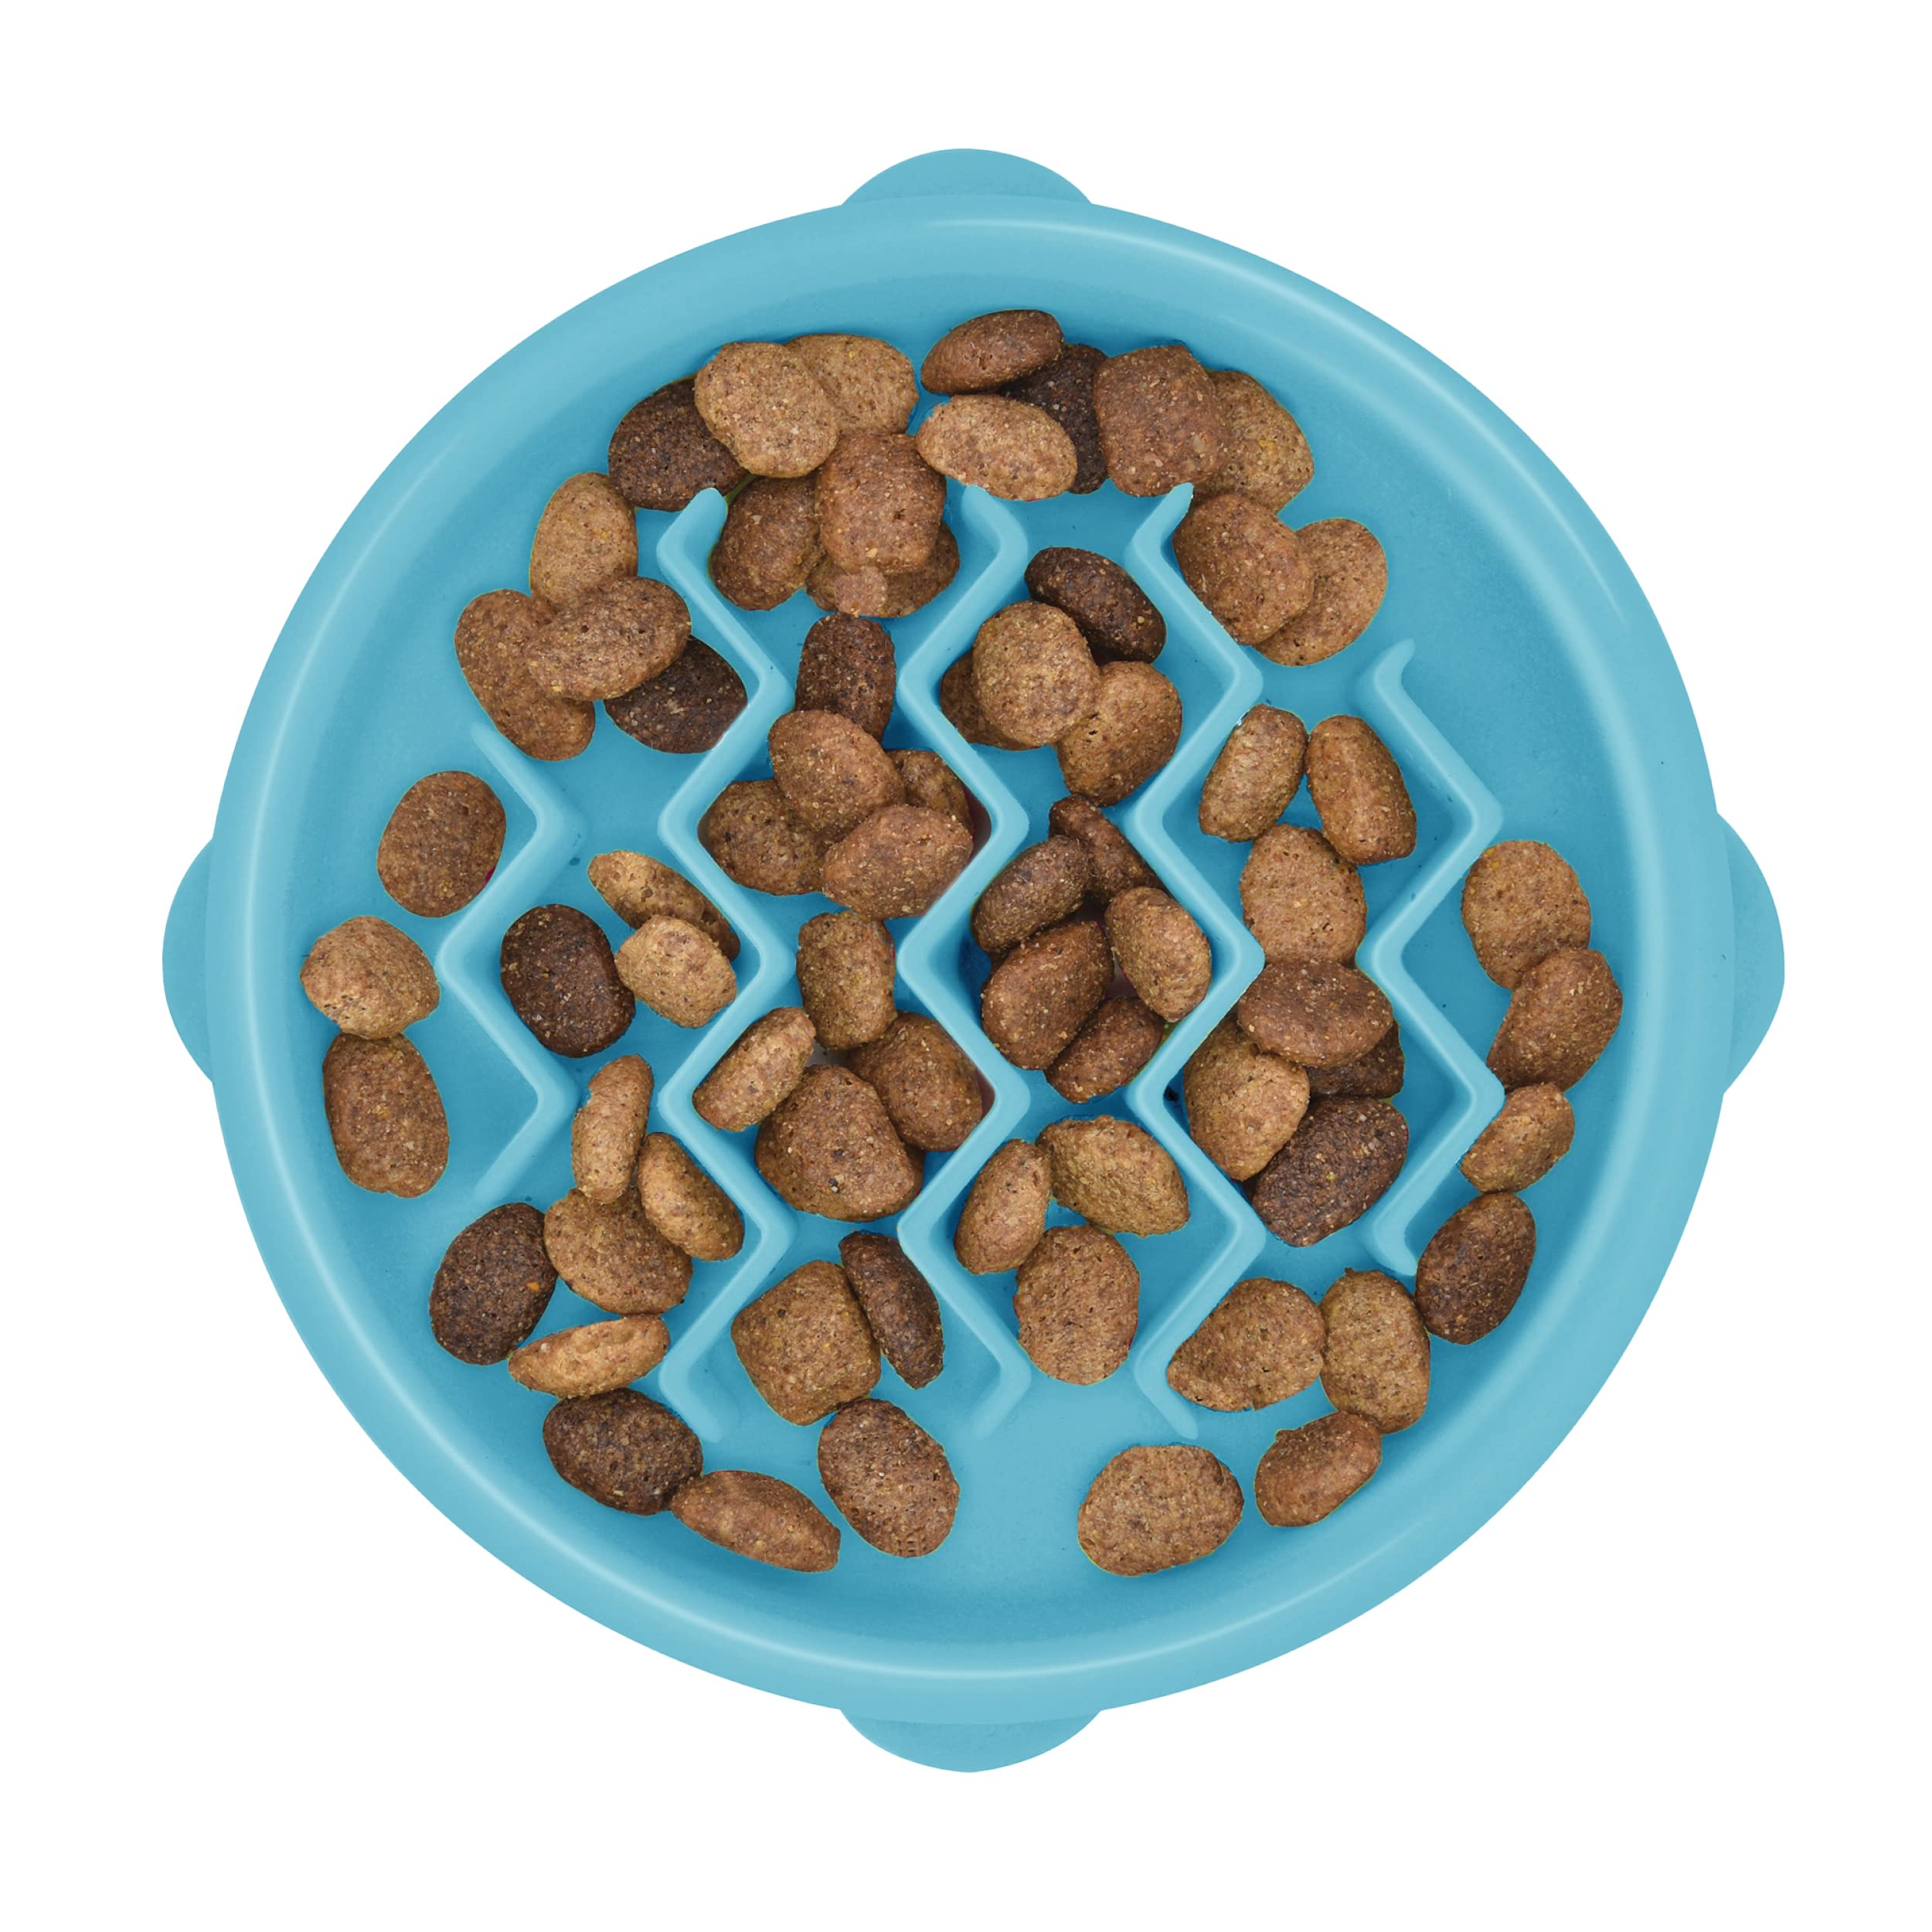 We Tested Six Slow Feeder Bowls For Mental Enrichment and There